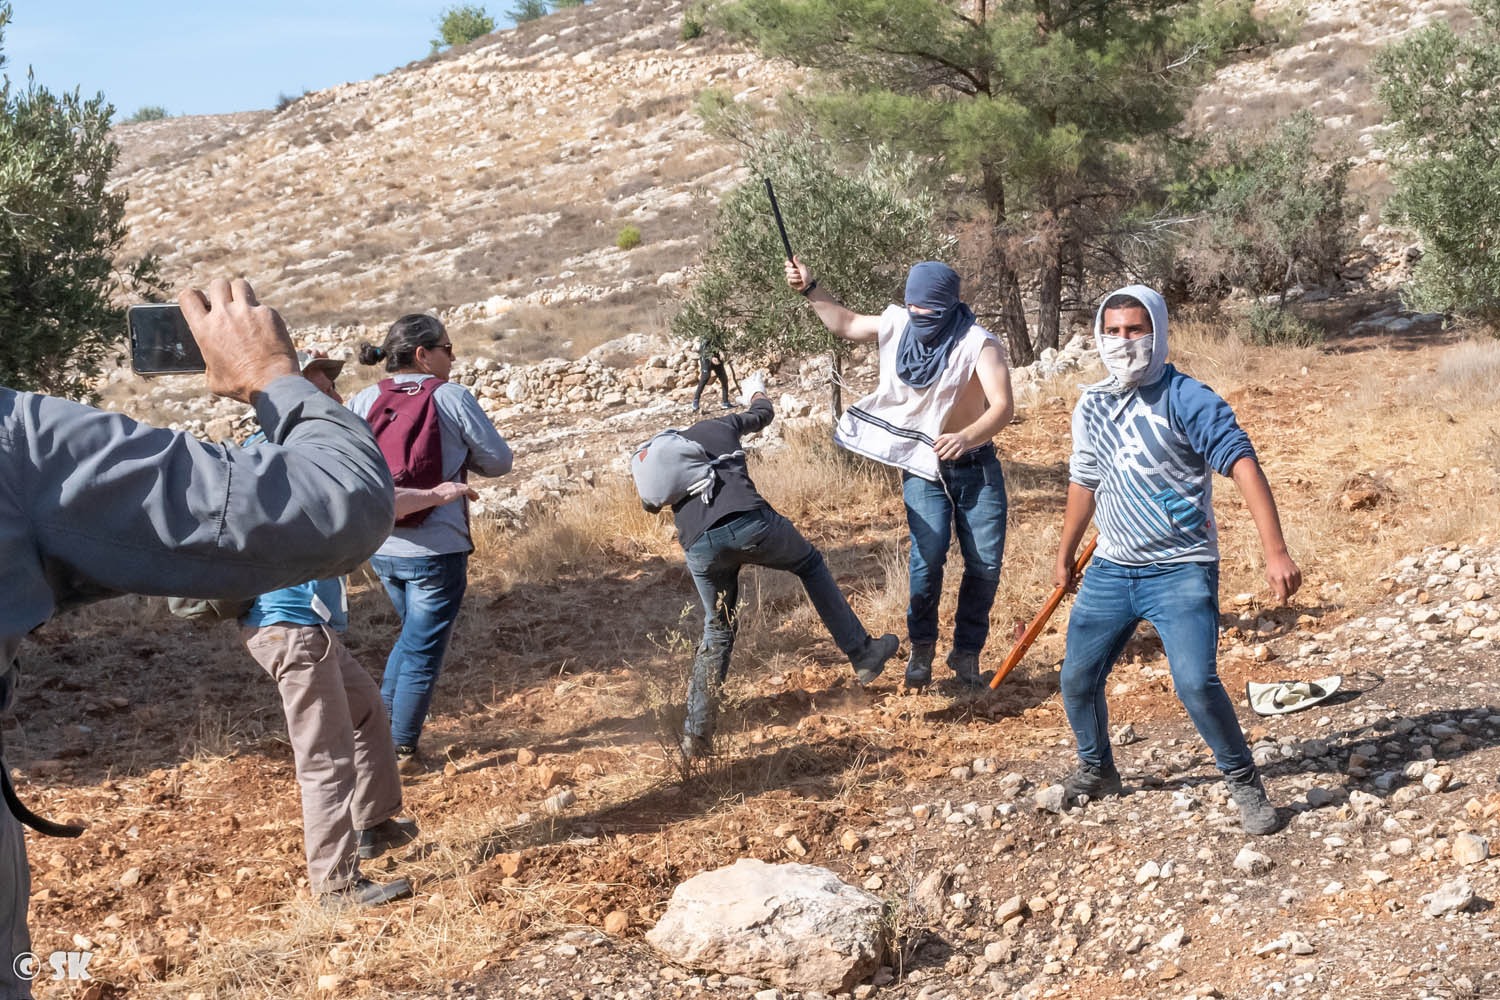 Israeli settlers assaulting Palestinian residents and solidarity activists during an attack on an olive harvest in the town of Surif, South Hebron Hills, West Bank, Nov. 12, 2021. (Shay Kendler)